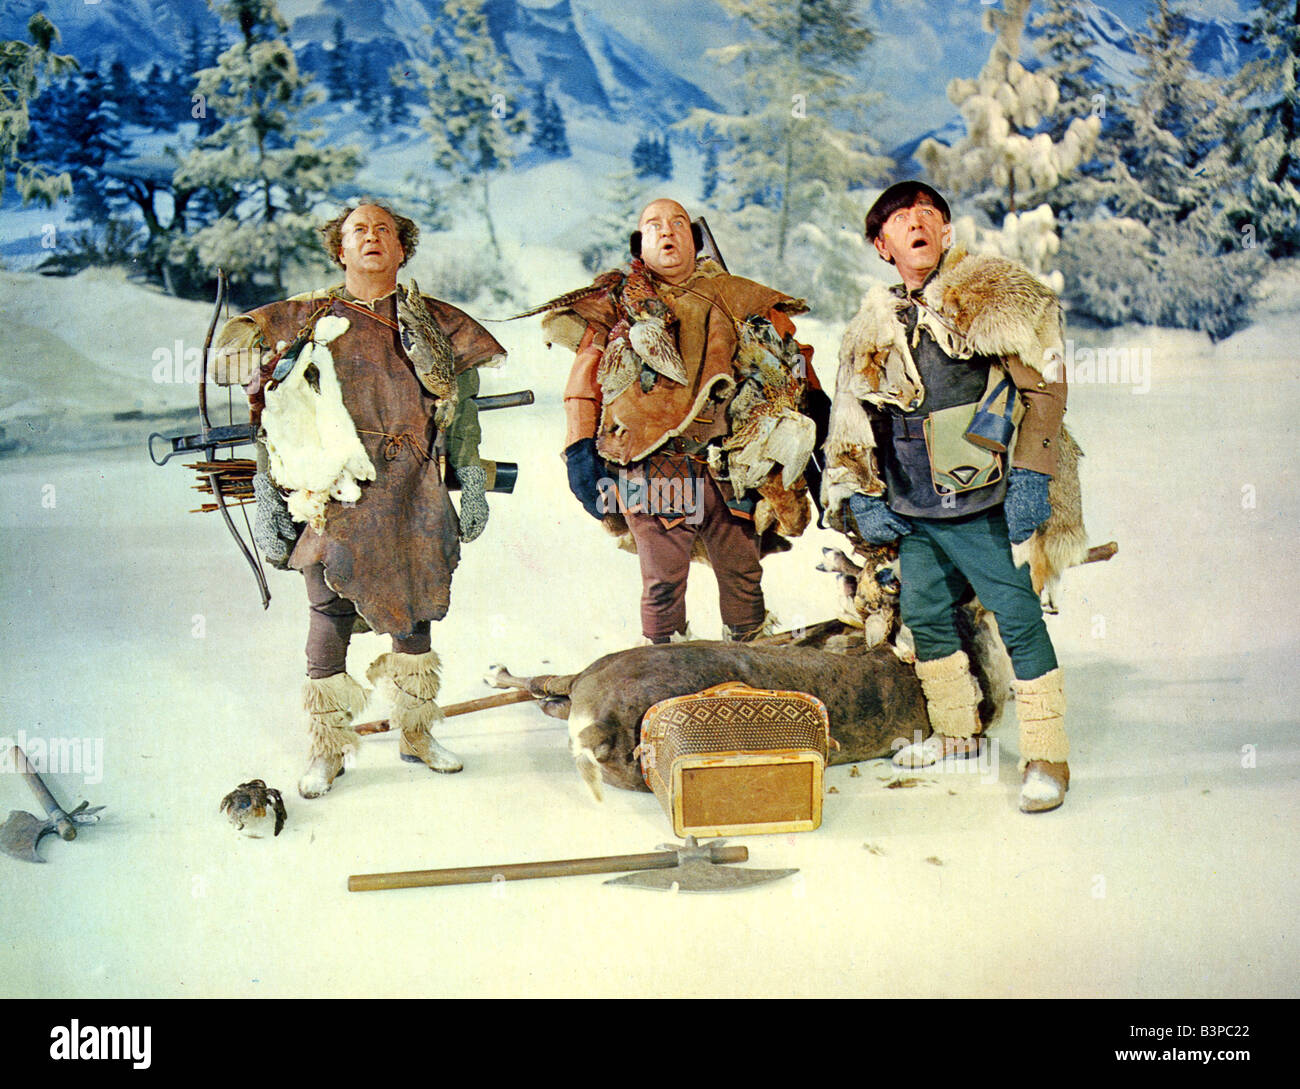 SNOW WHITE AND THE THREE STOOGES 1961 TCF film aka Snow White and the Three Clowns Stock Photo